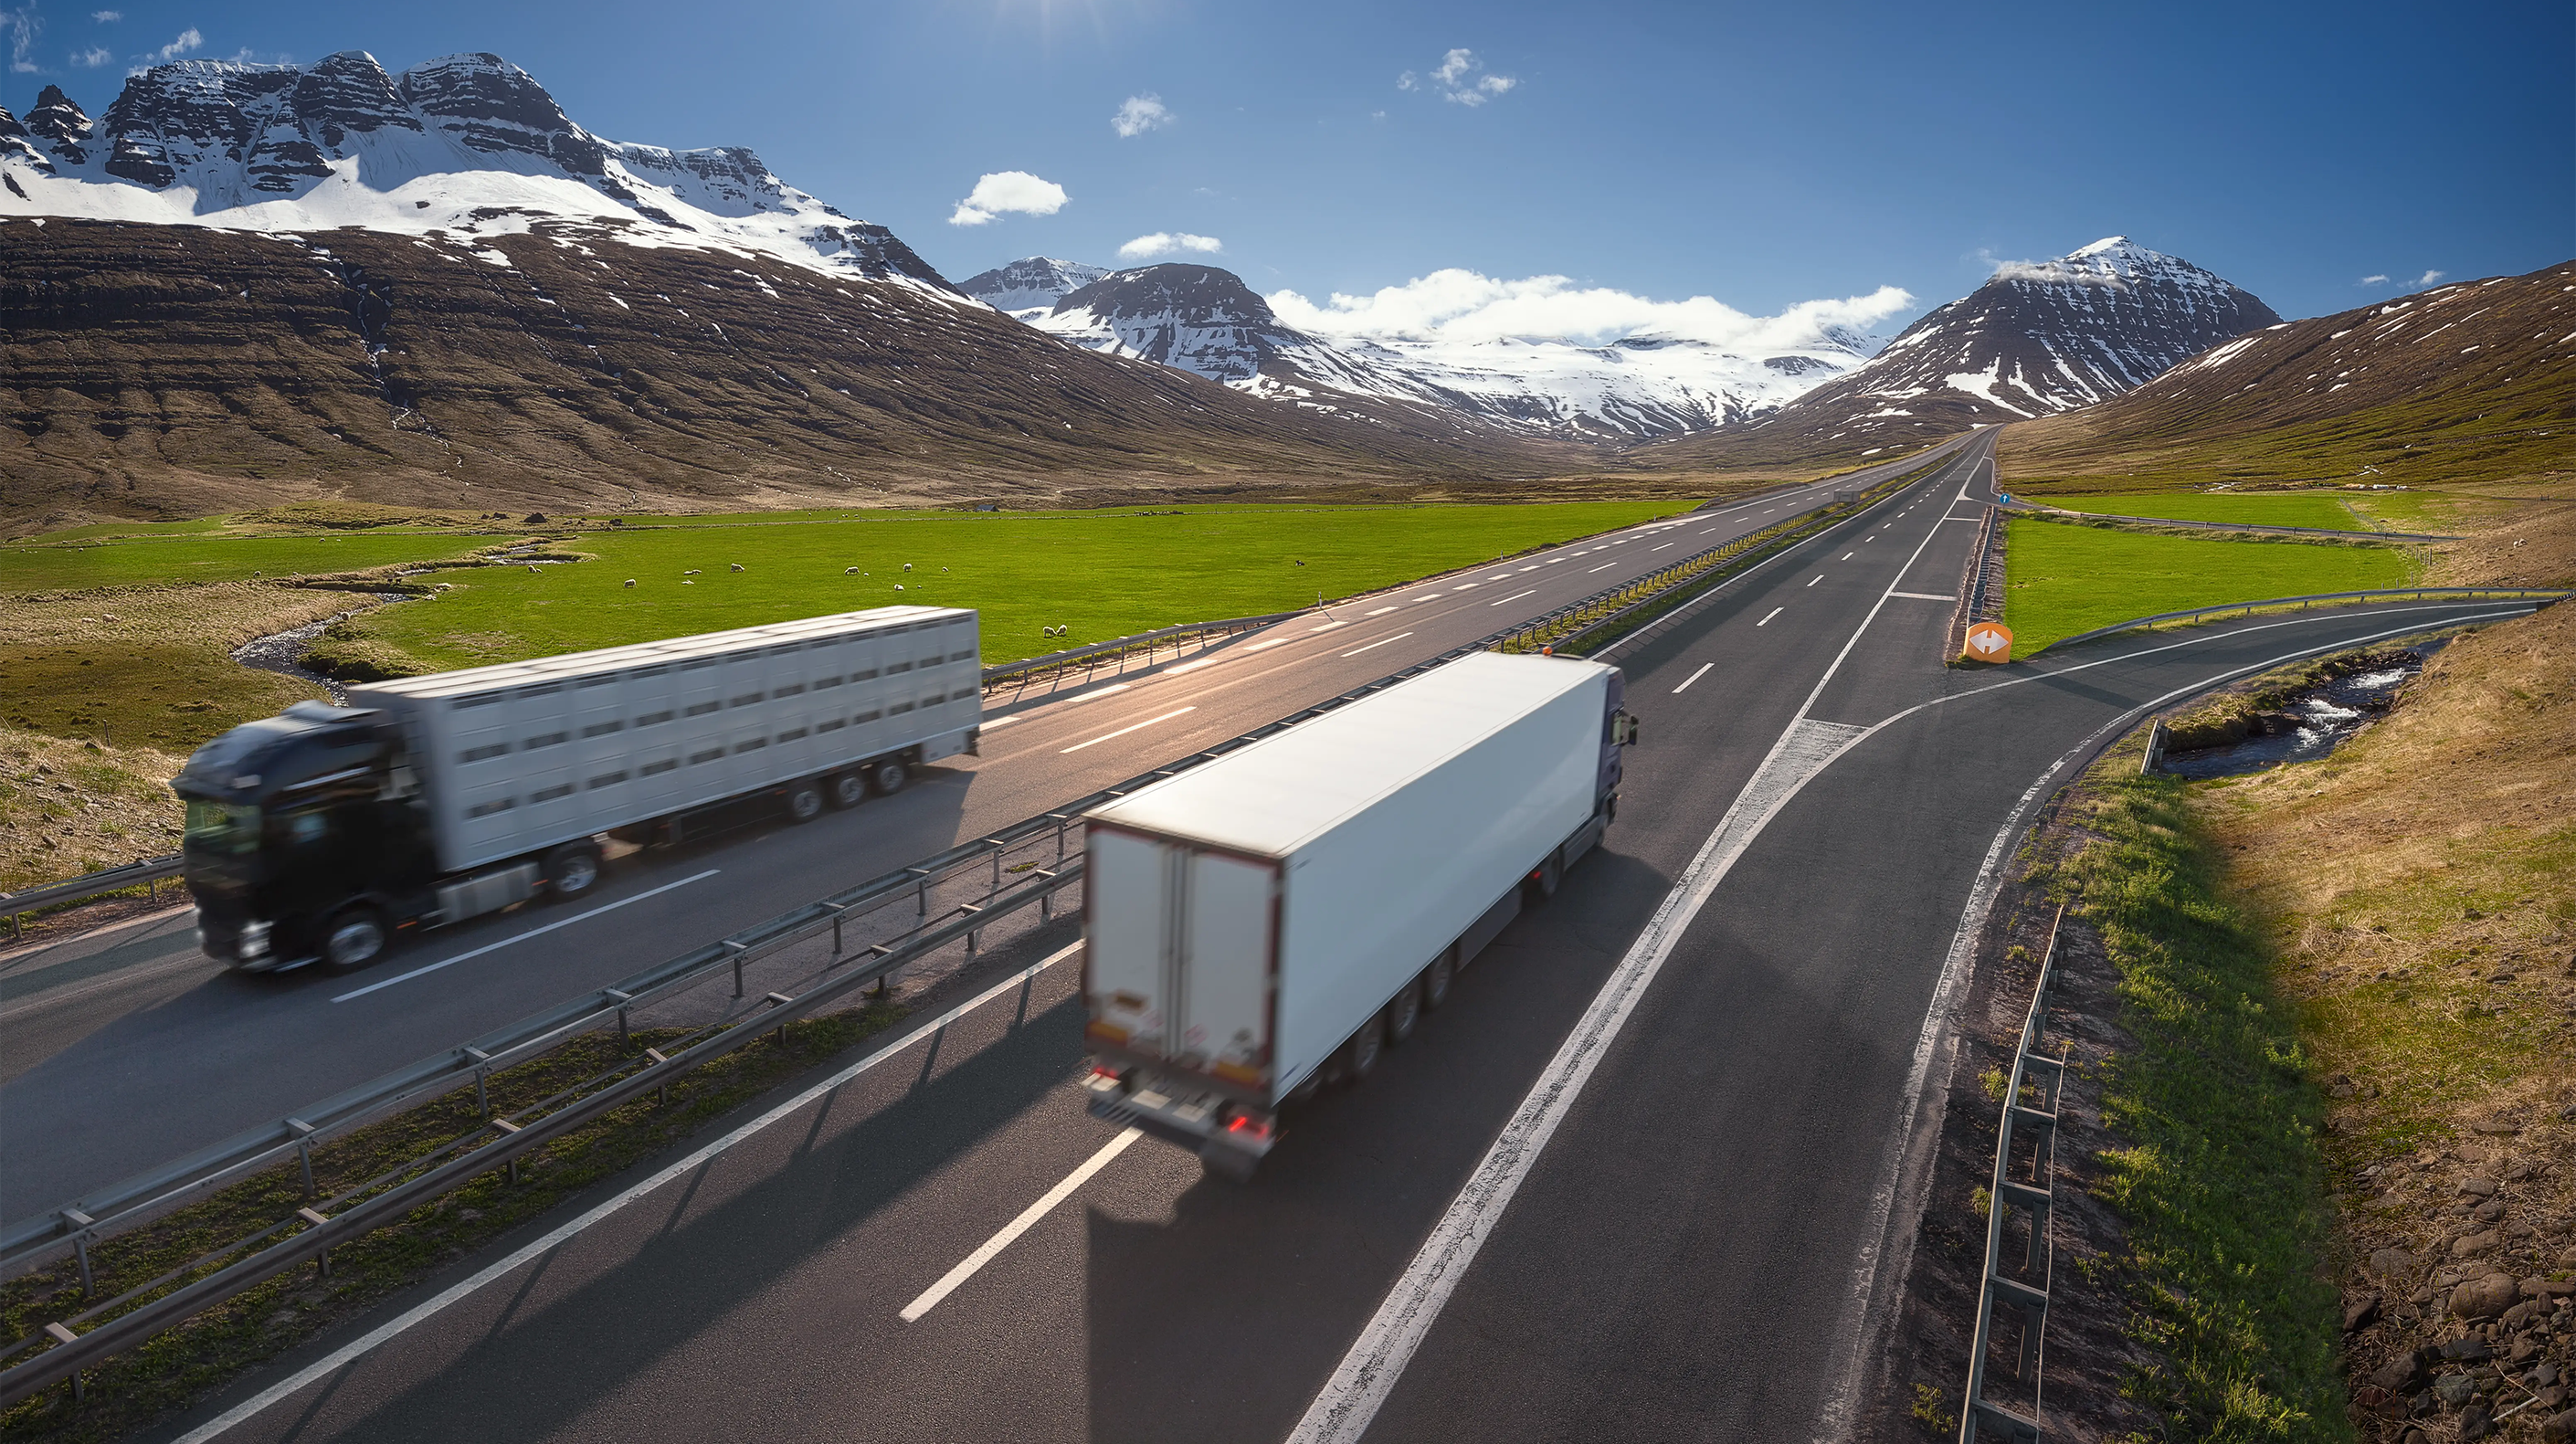 Photograph of a highway with two trucks driving past each other in separate lanes.